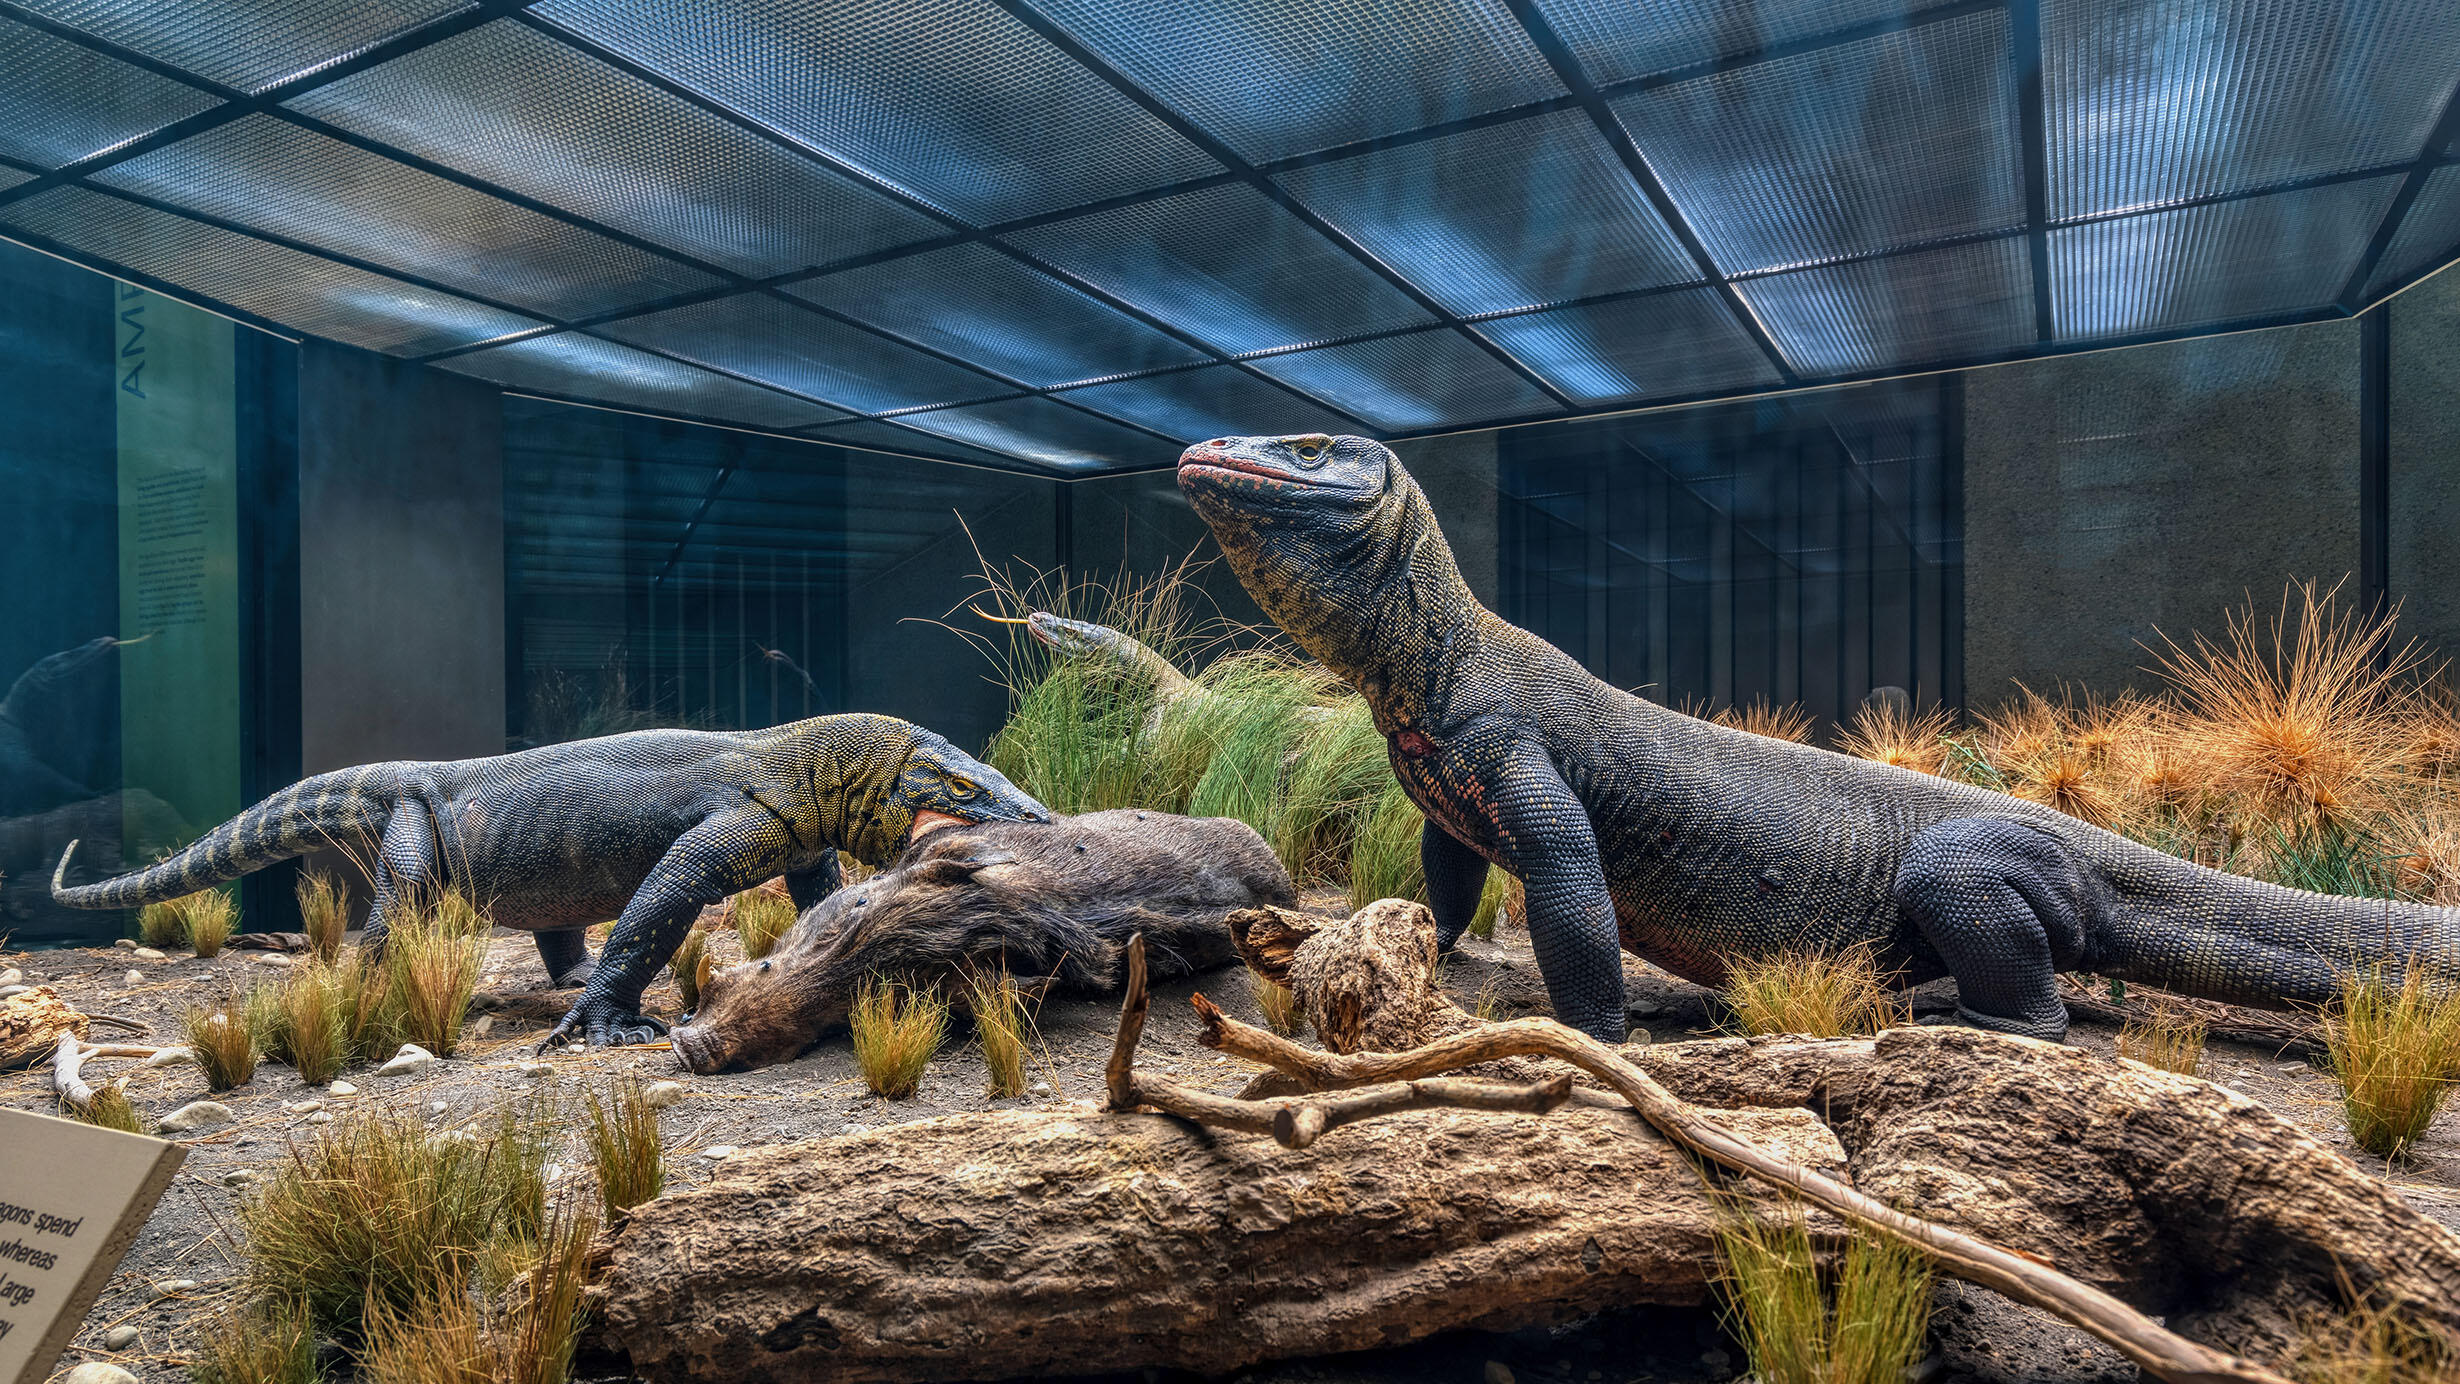 Museum diorama featuring three komodo dragons, one in foreground looking up and one beginning to eat a wild boar.